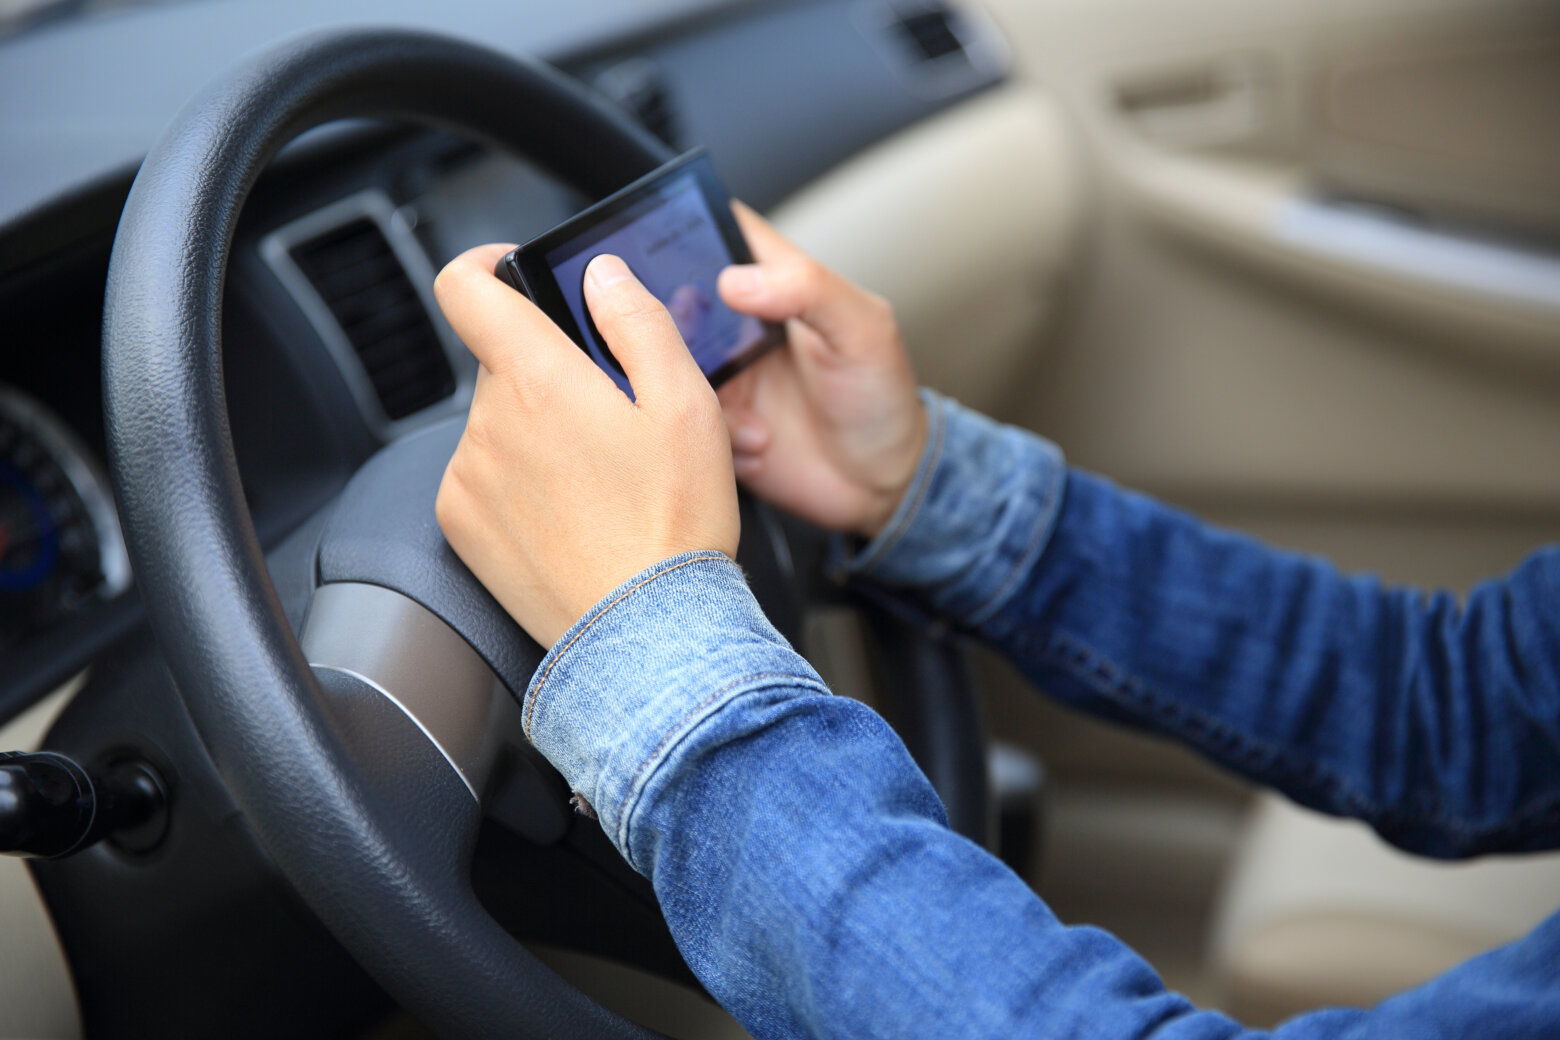 Md. lawmaker wants heftier fines for using cellphones while driving